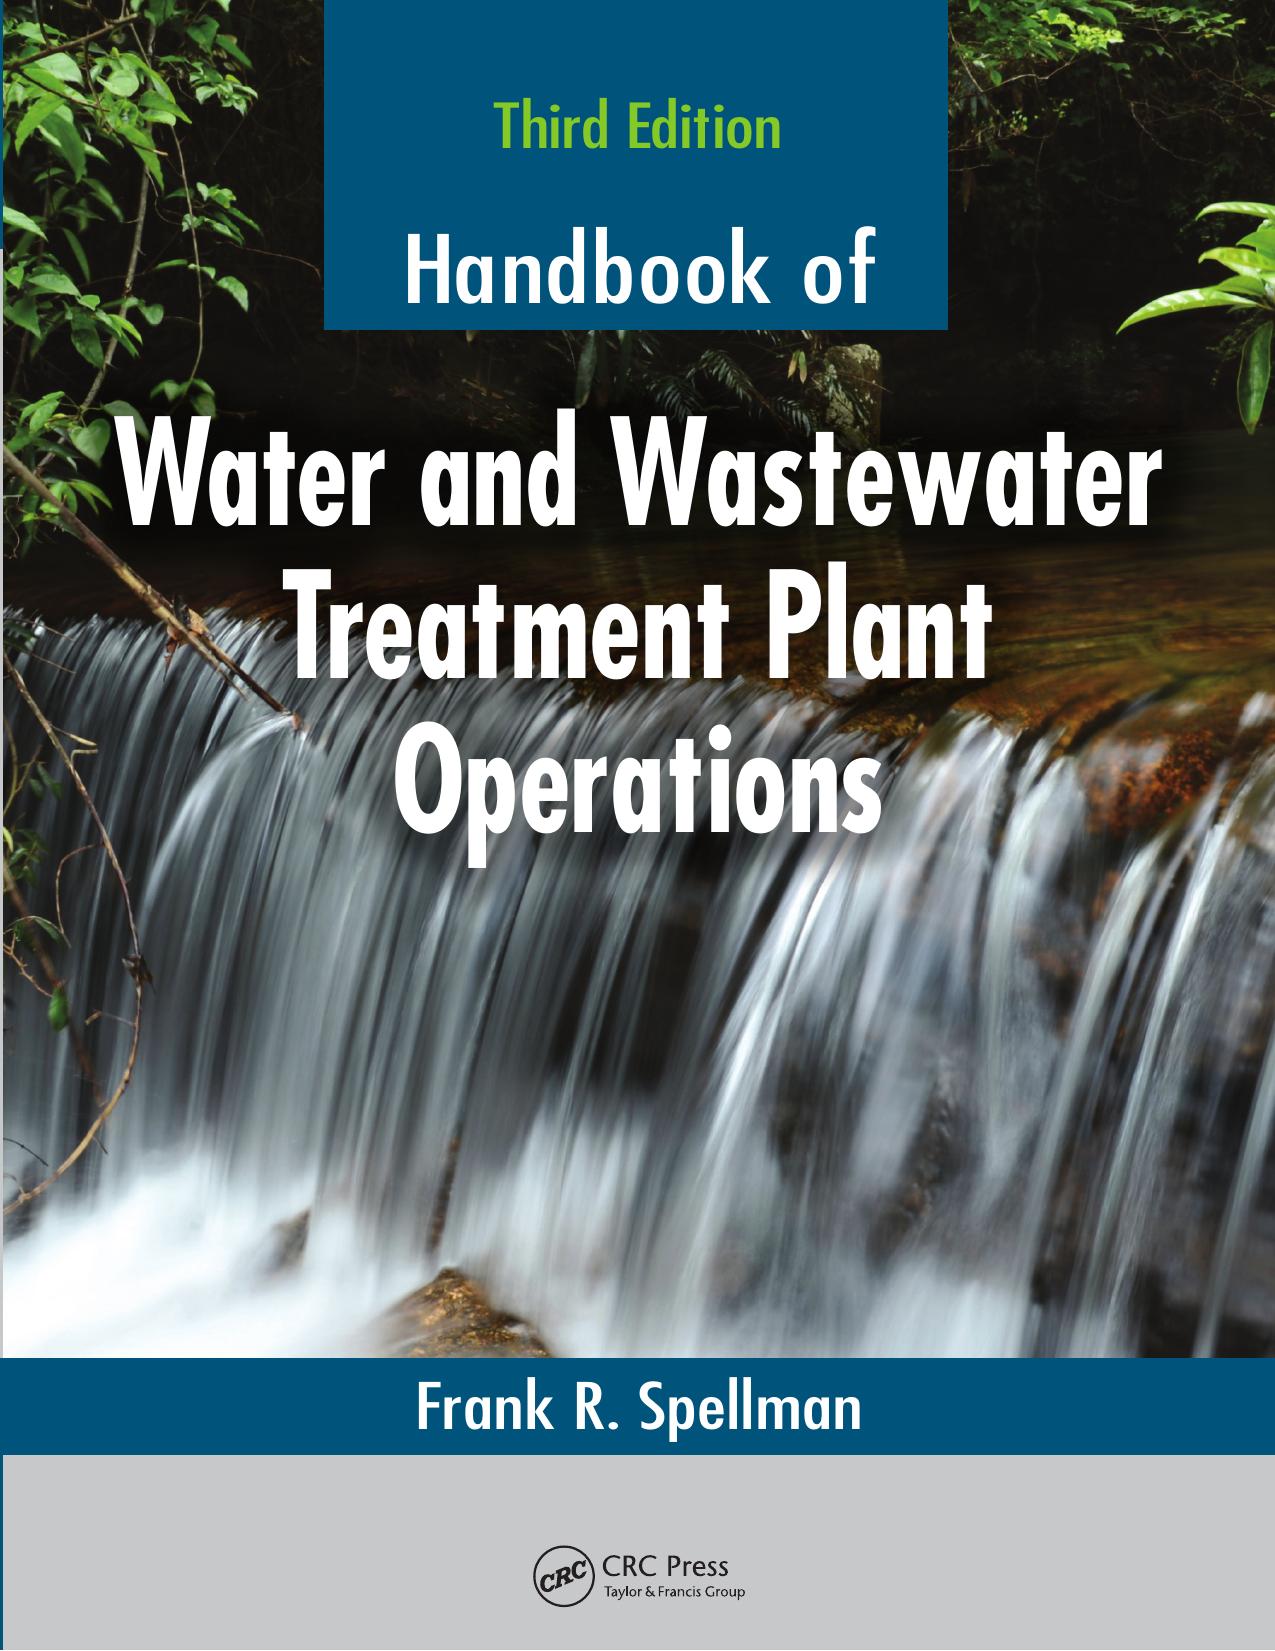 Handbook of Water and Wastewater Treatment Plant Operations, Third Edition